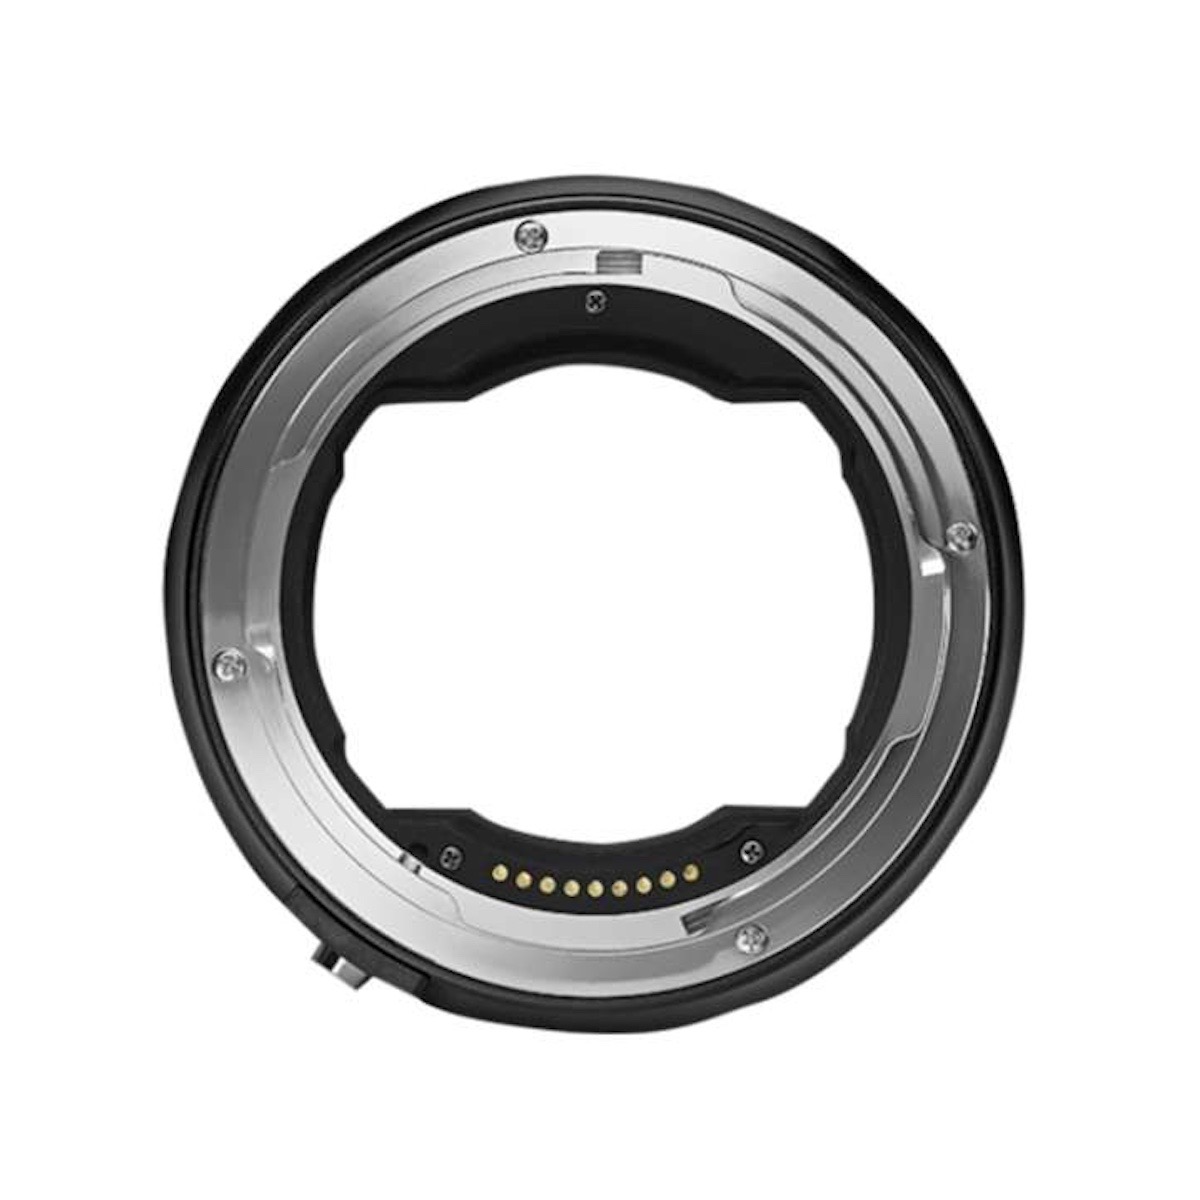 Hasselblad Extension Tube H 13 mm